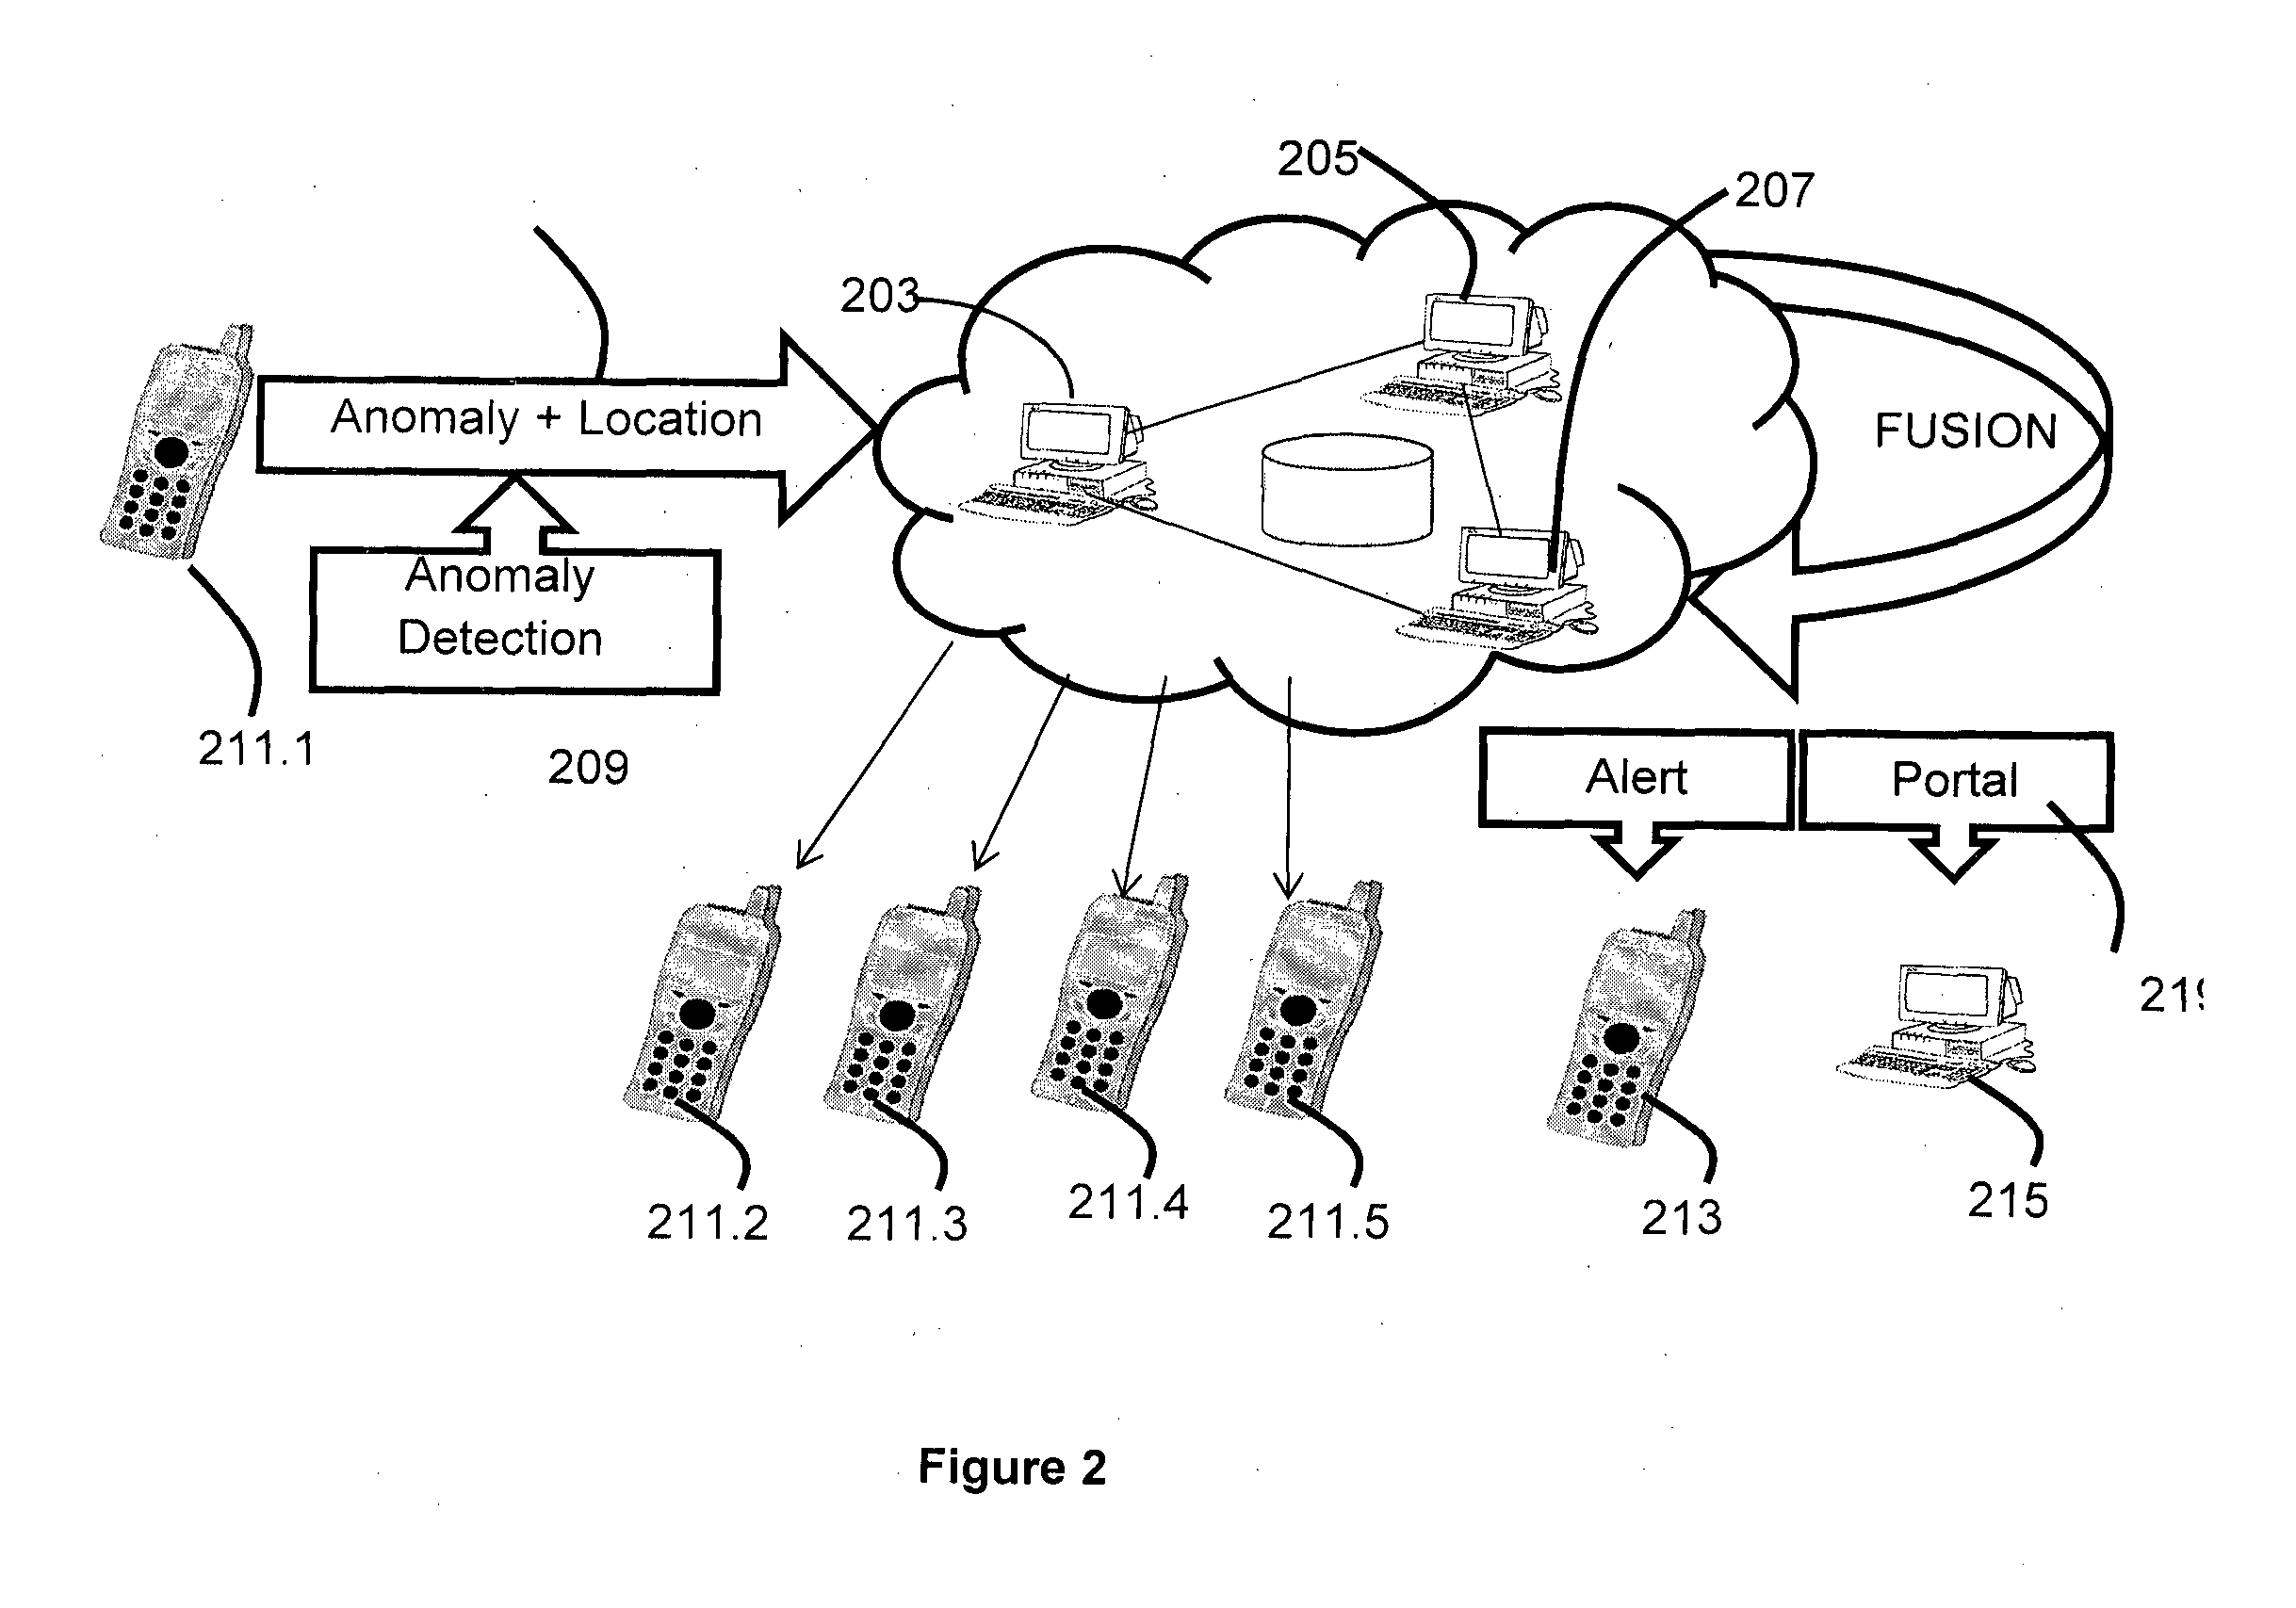 Computer Platform for Development and Deployment of Sensor-Driven Vehicle Telemetry Applications and Services